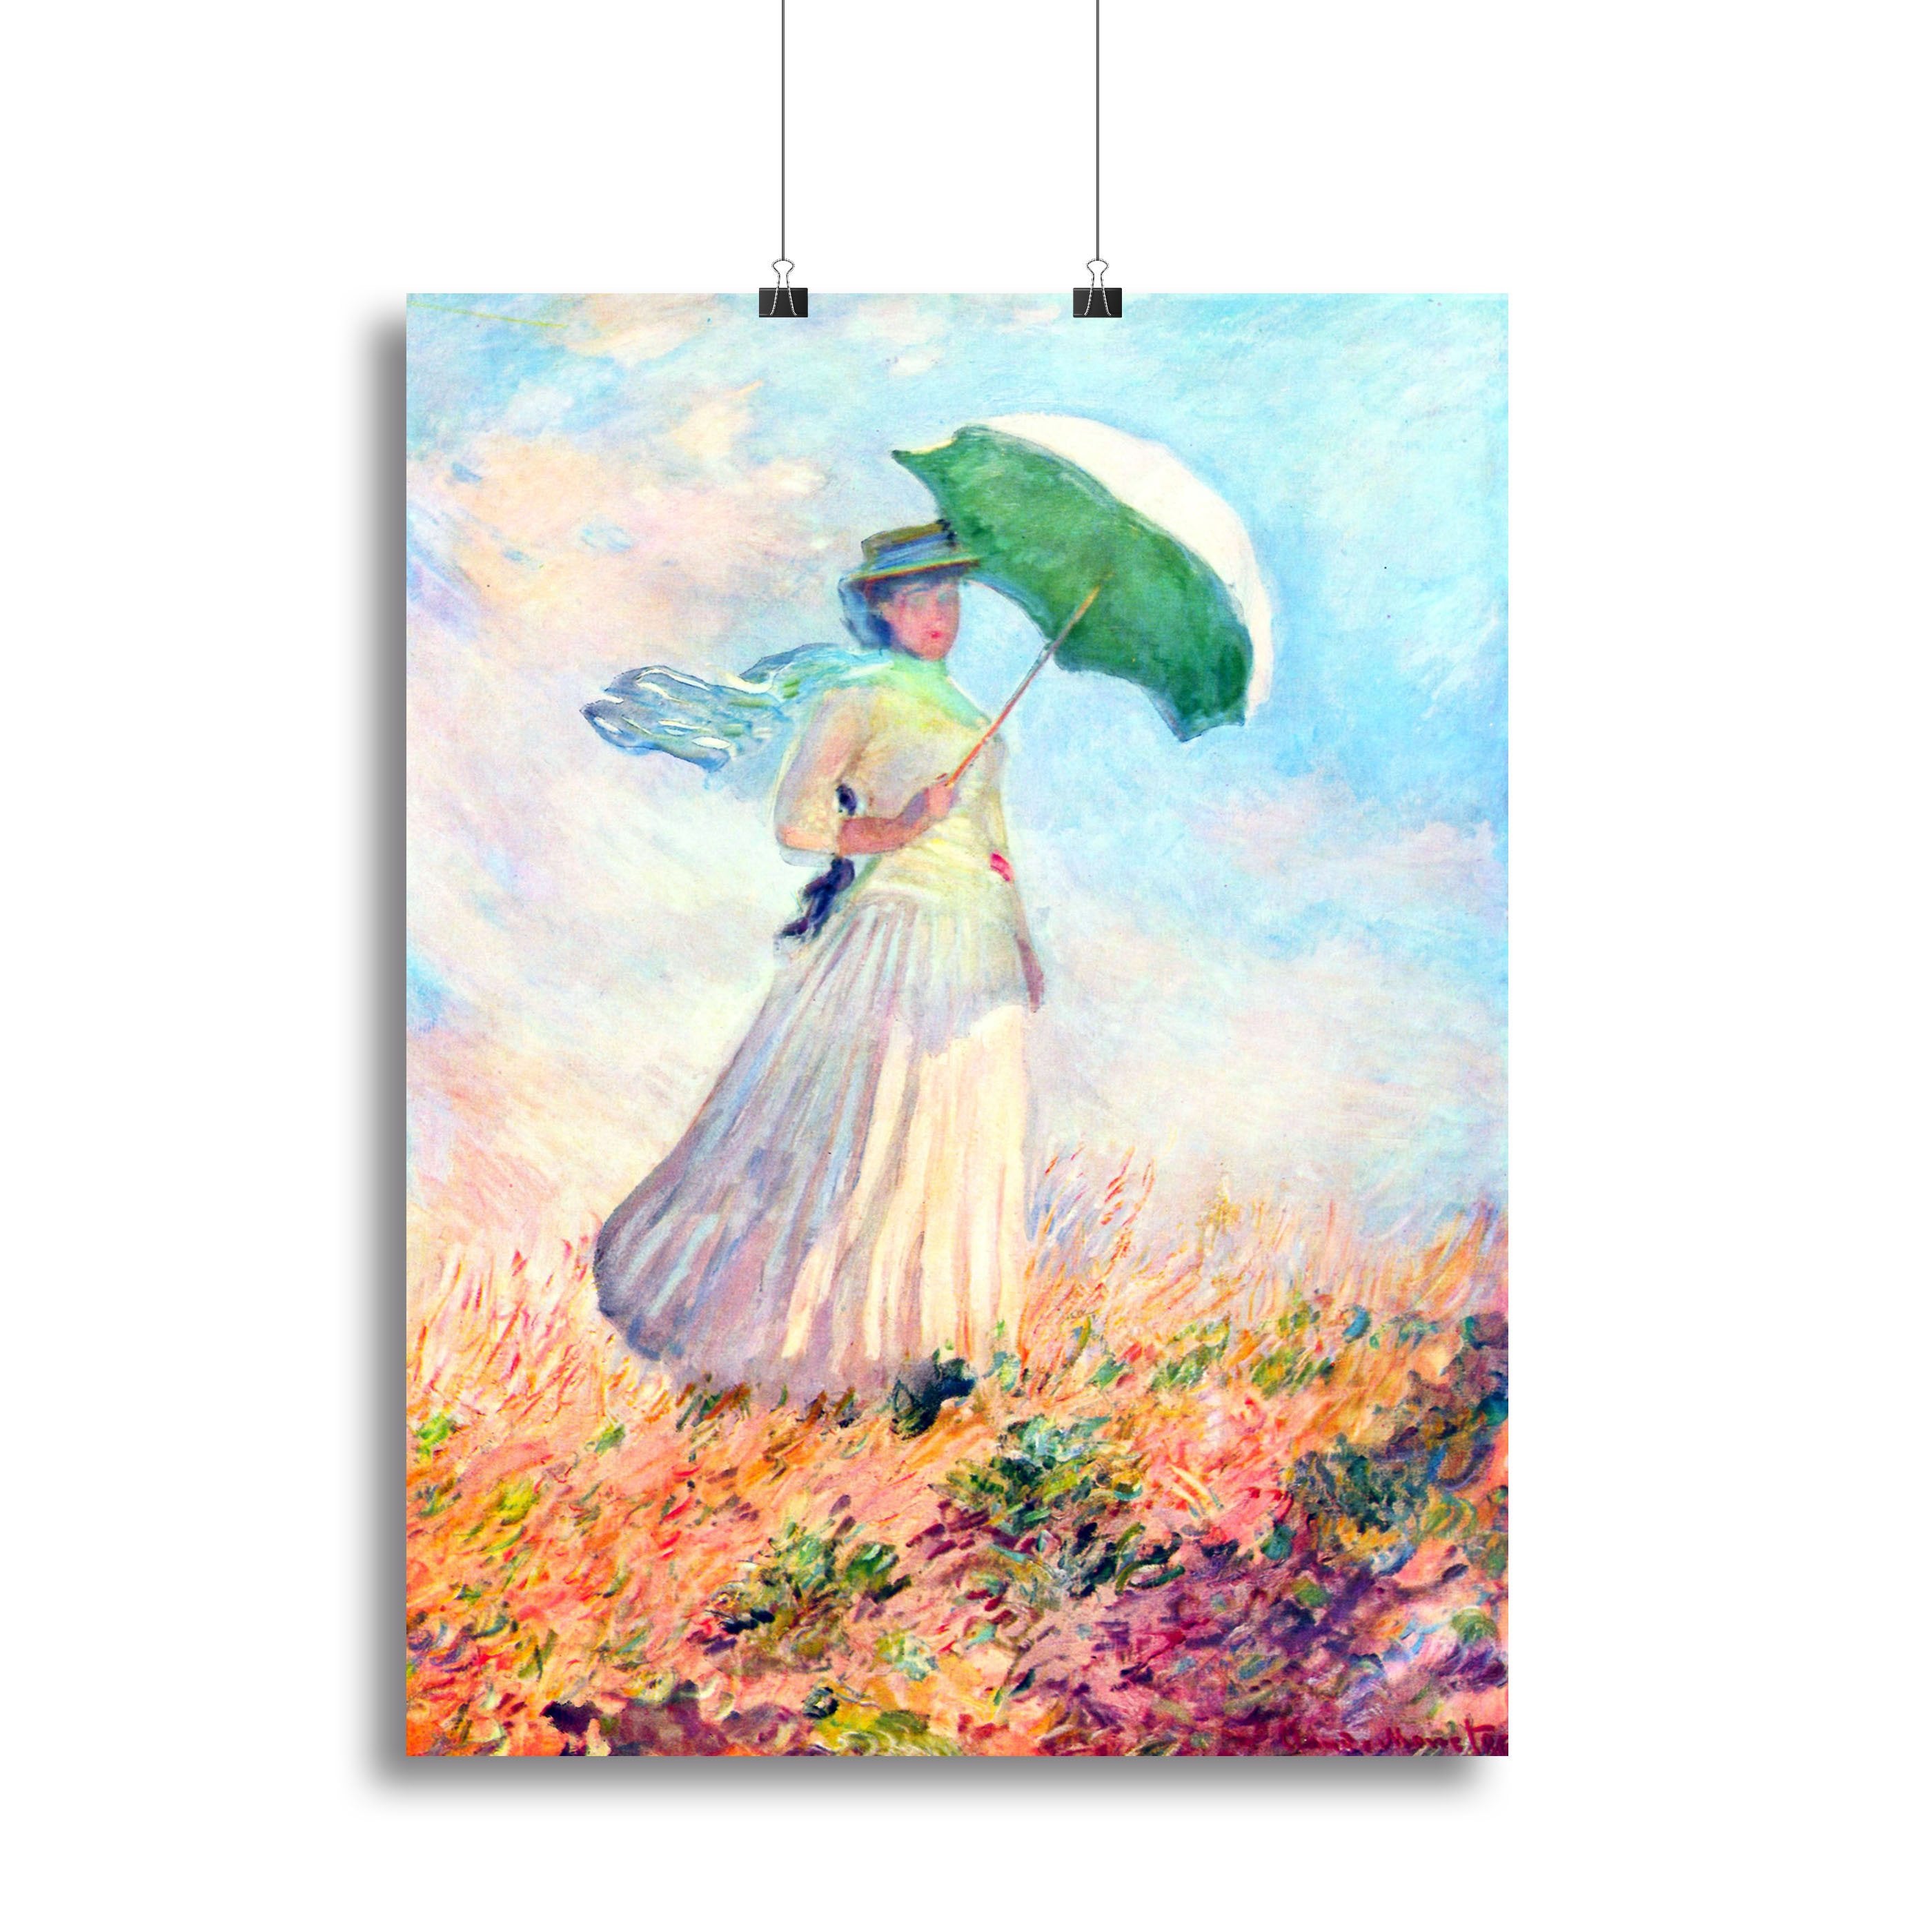 Lady with sunshade study by Monet Canvas Print or Poster